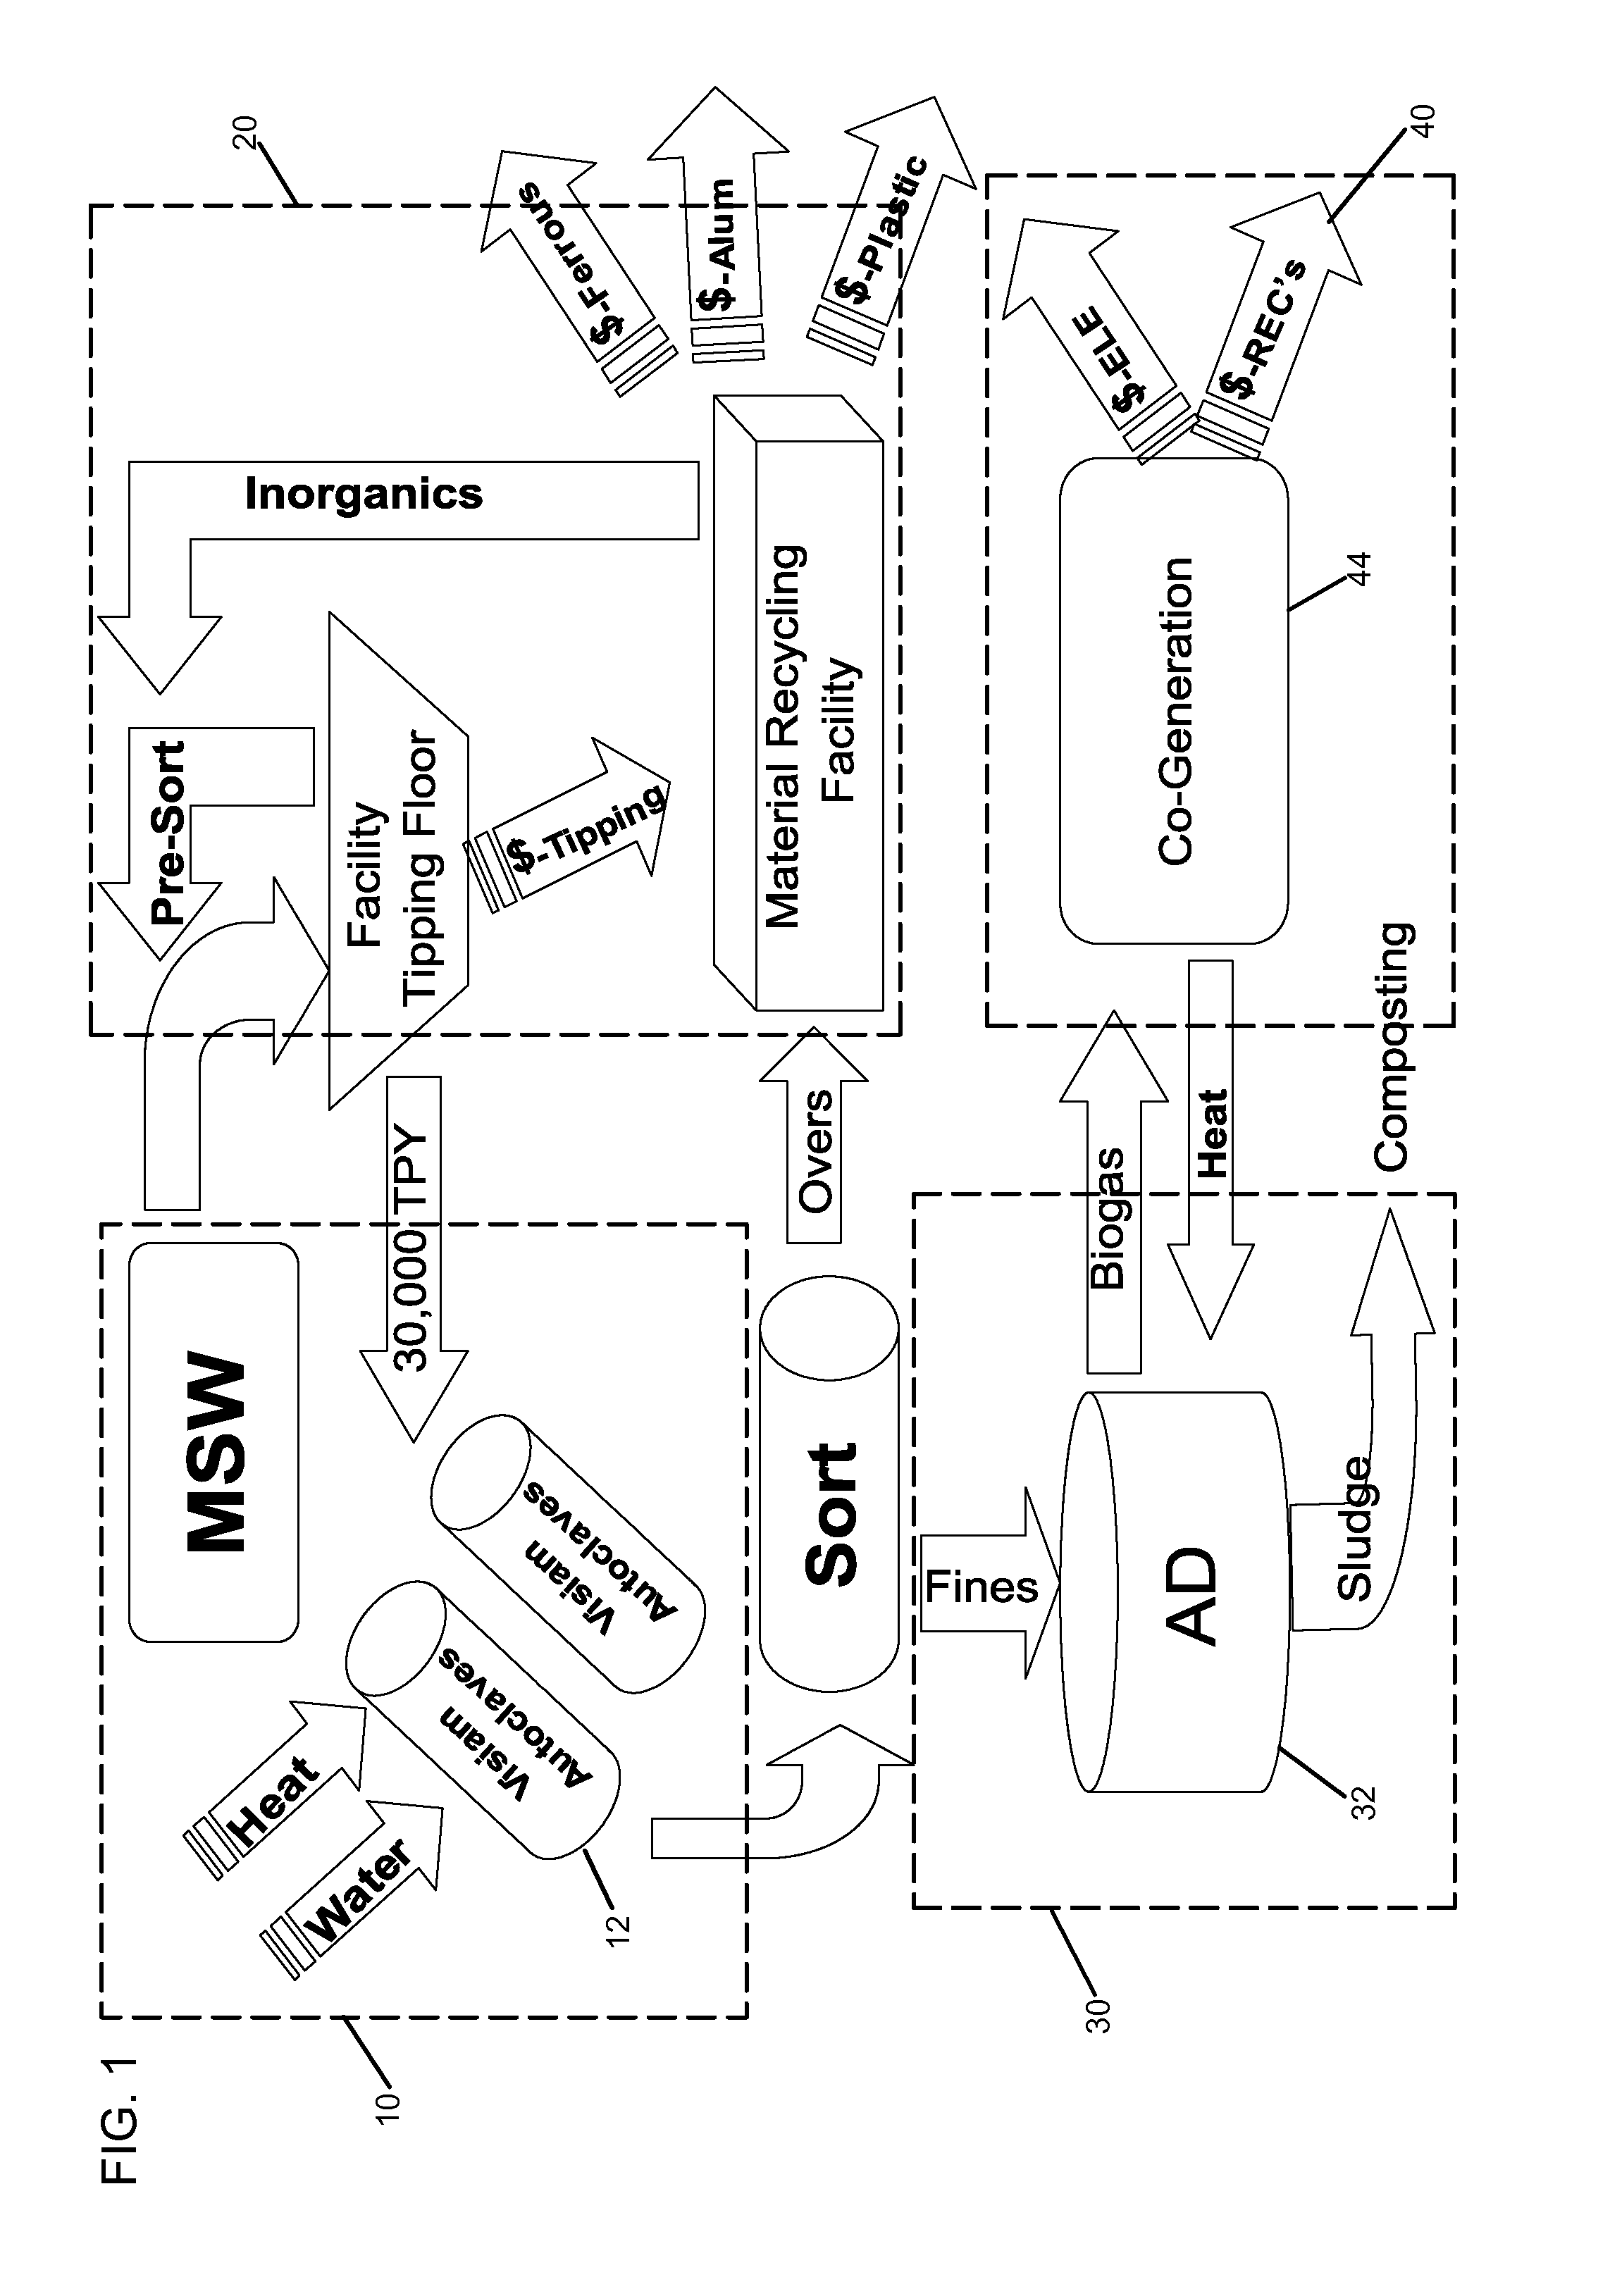 Integrated waste/heat recycle system